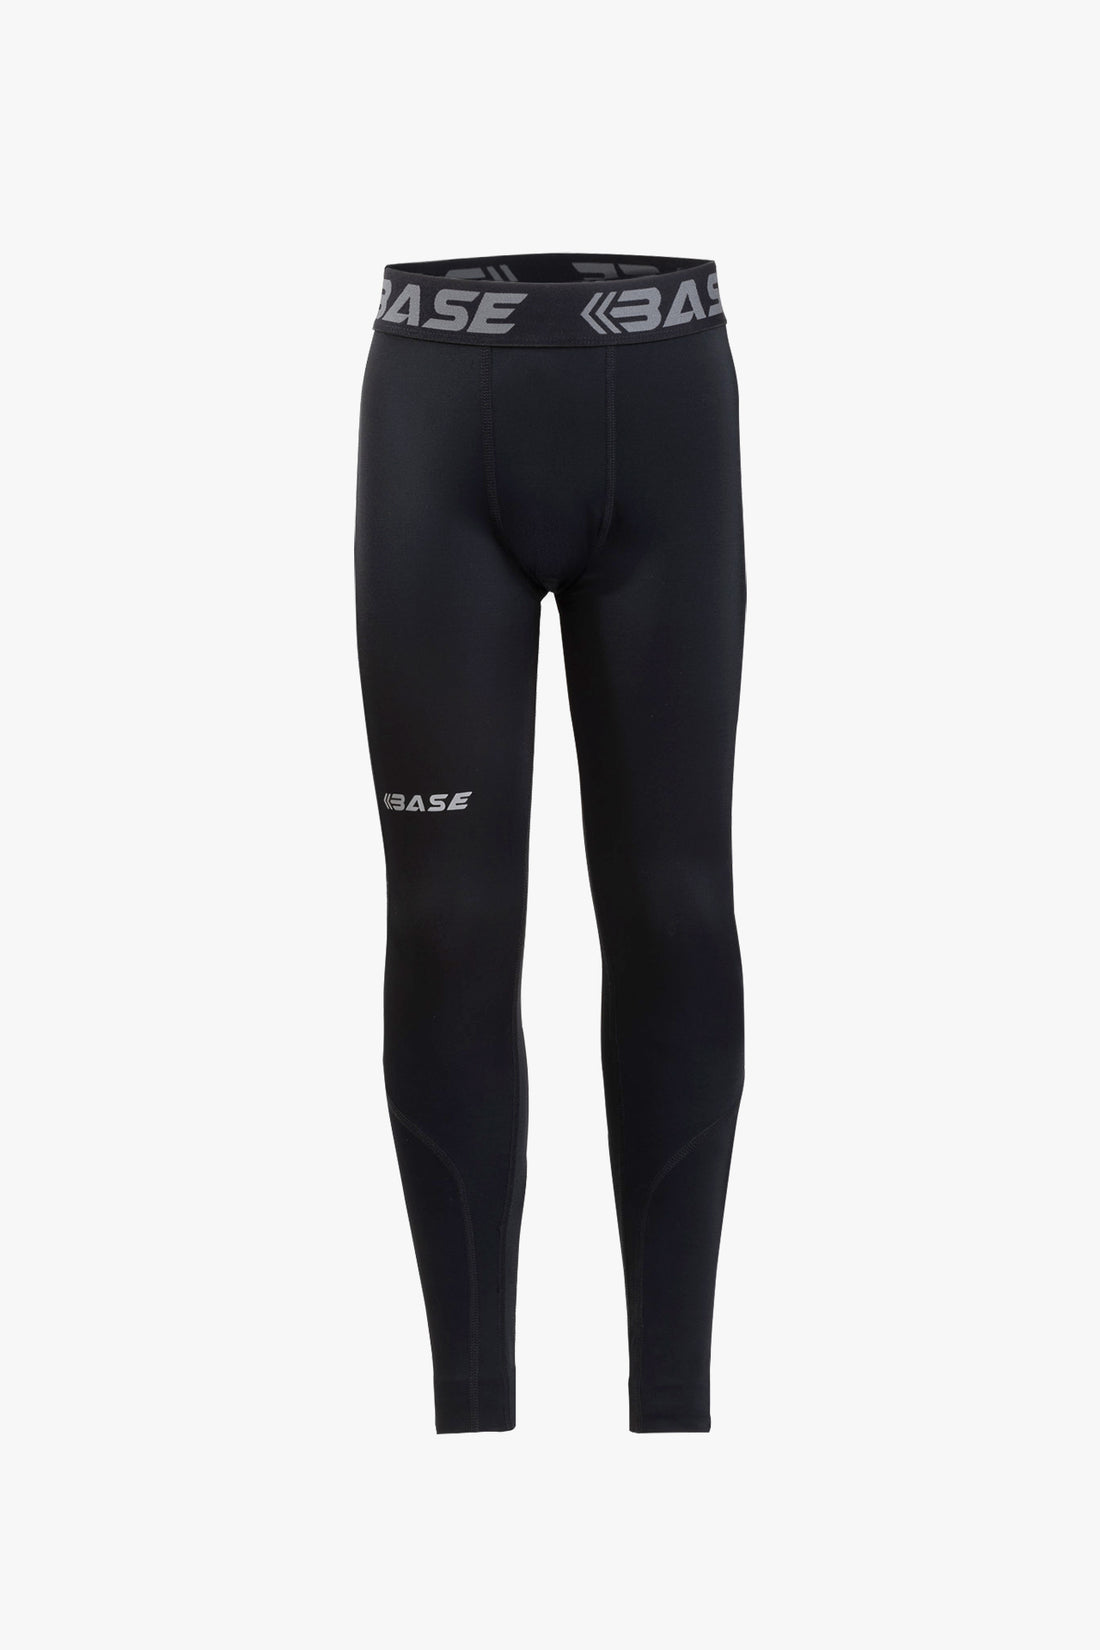 BASE Youth Compression Tights - Black